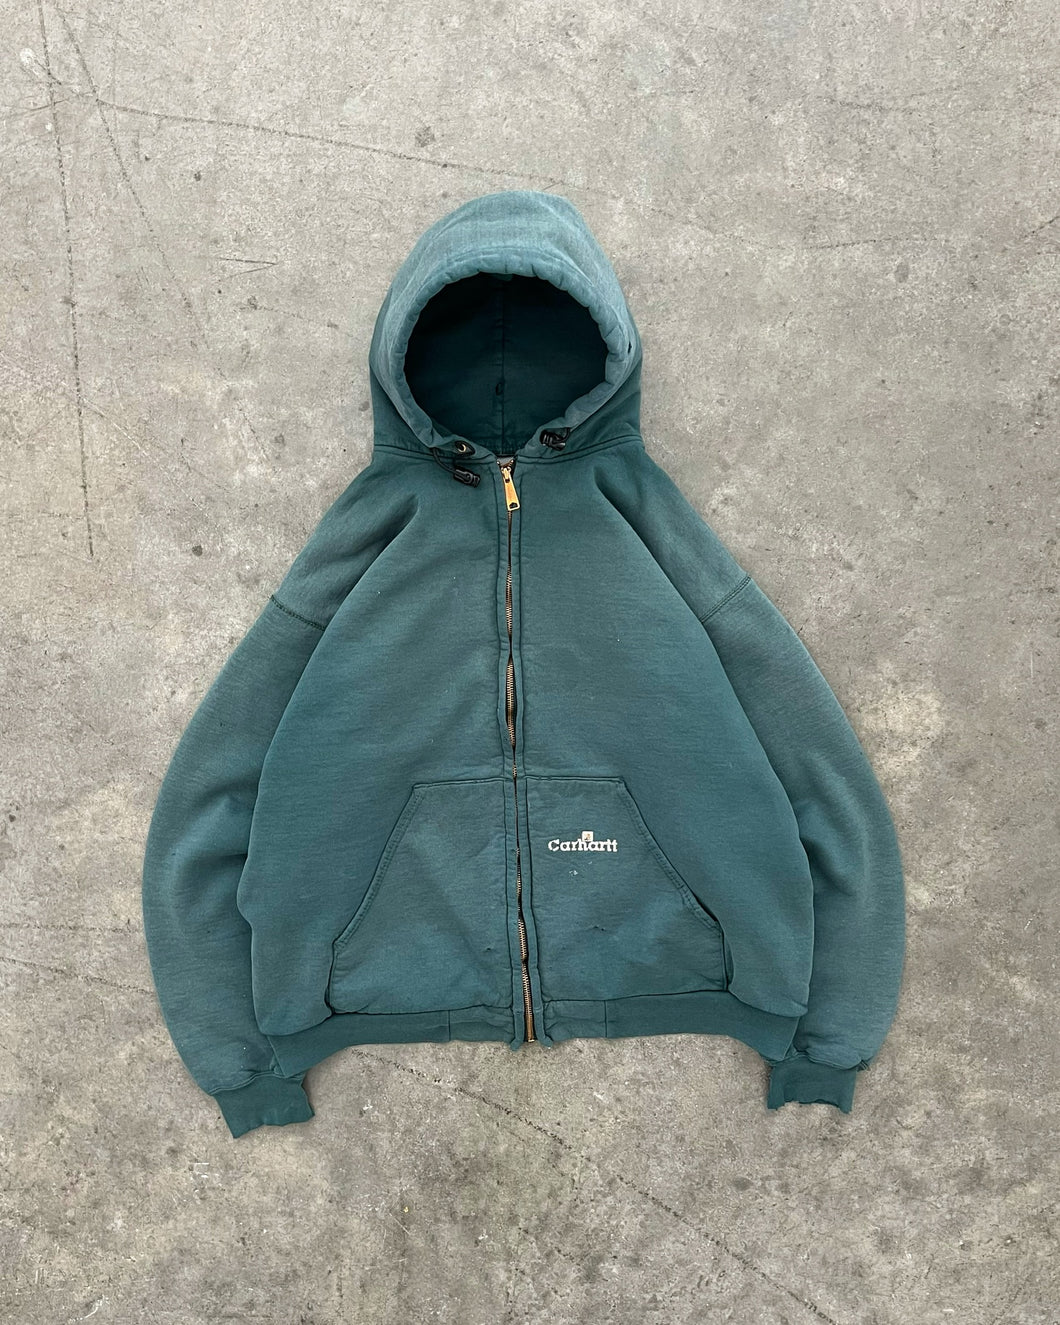 SUN FADED GREEN THERMAL LINED CARHARTT ZIP UP HOODIE - 1990S